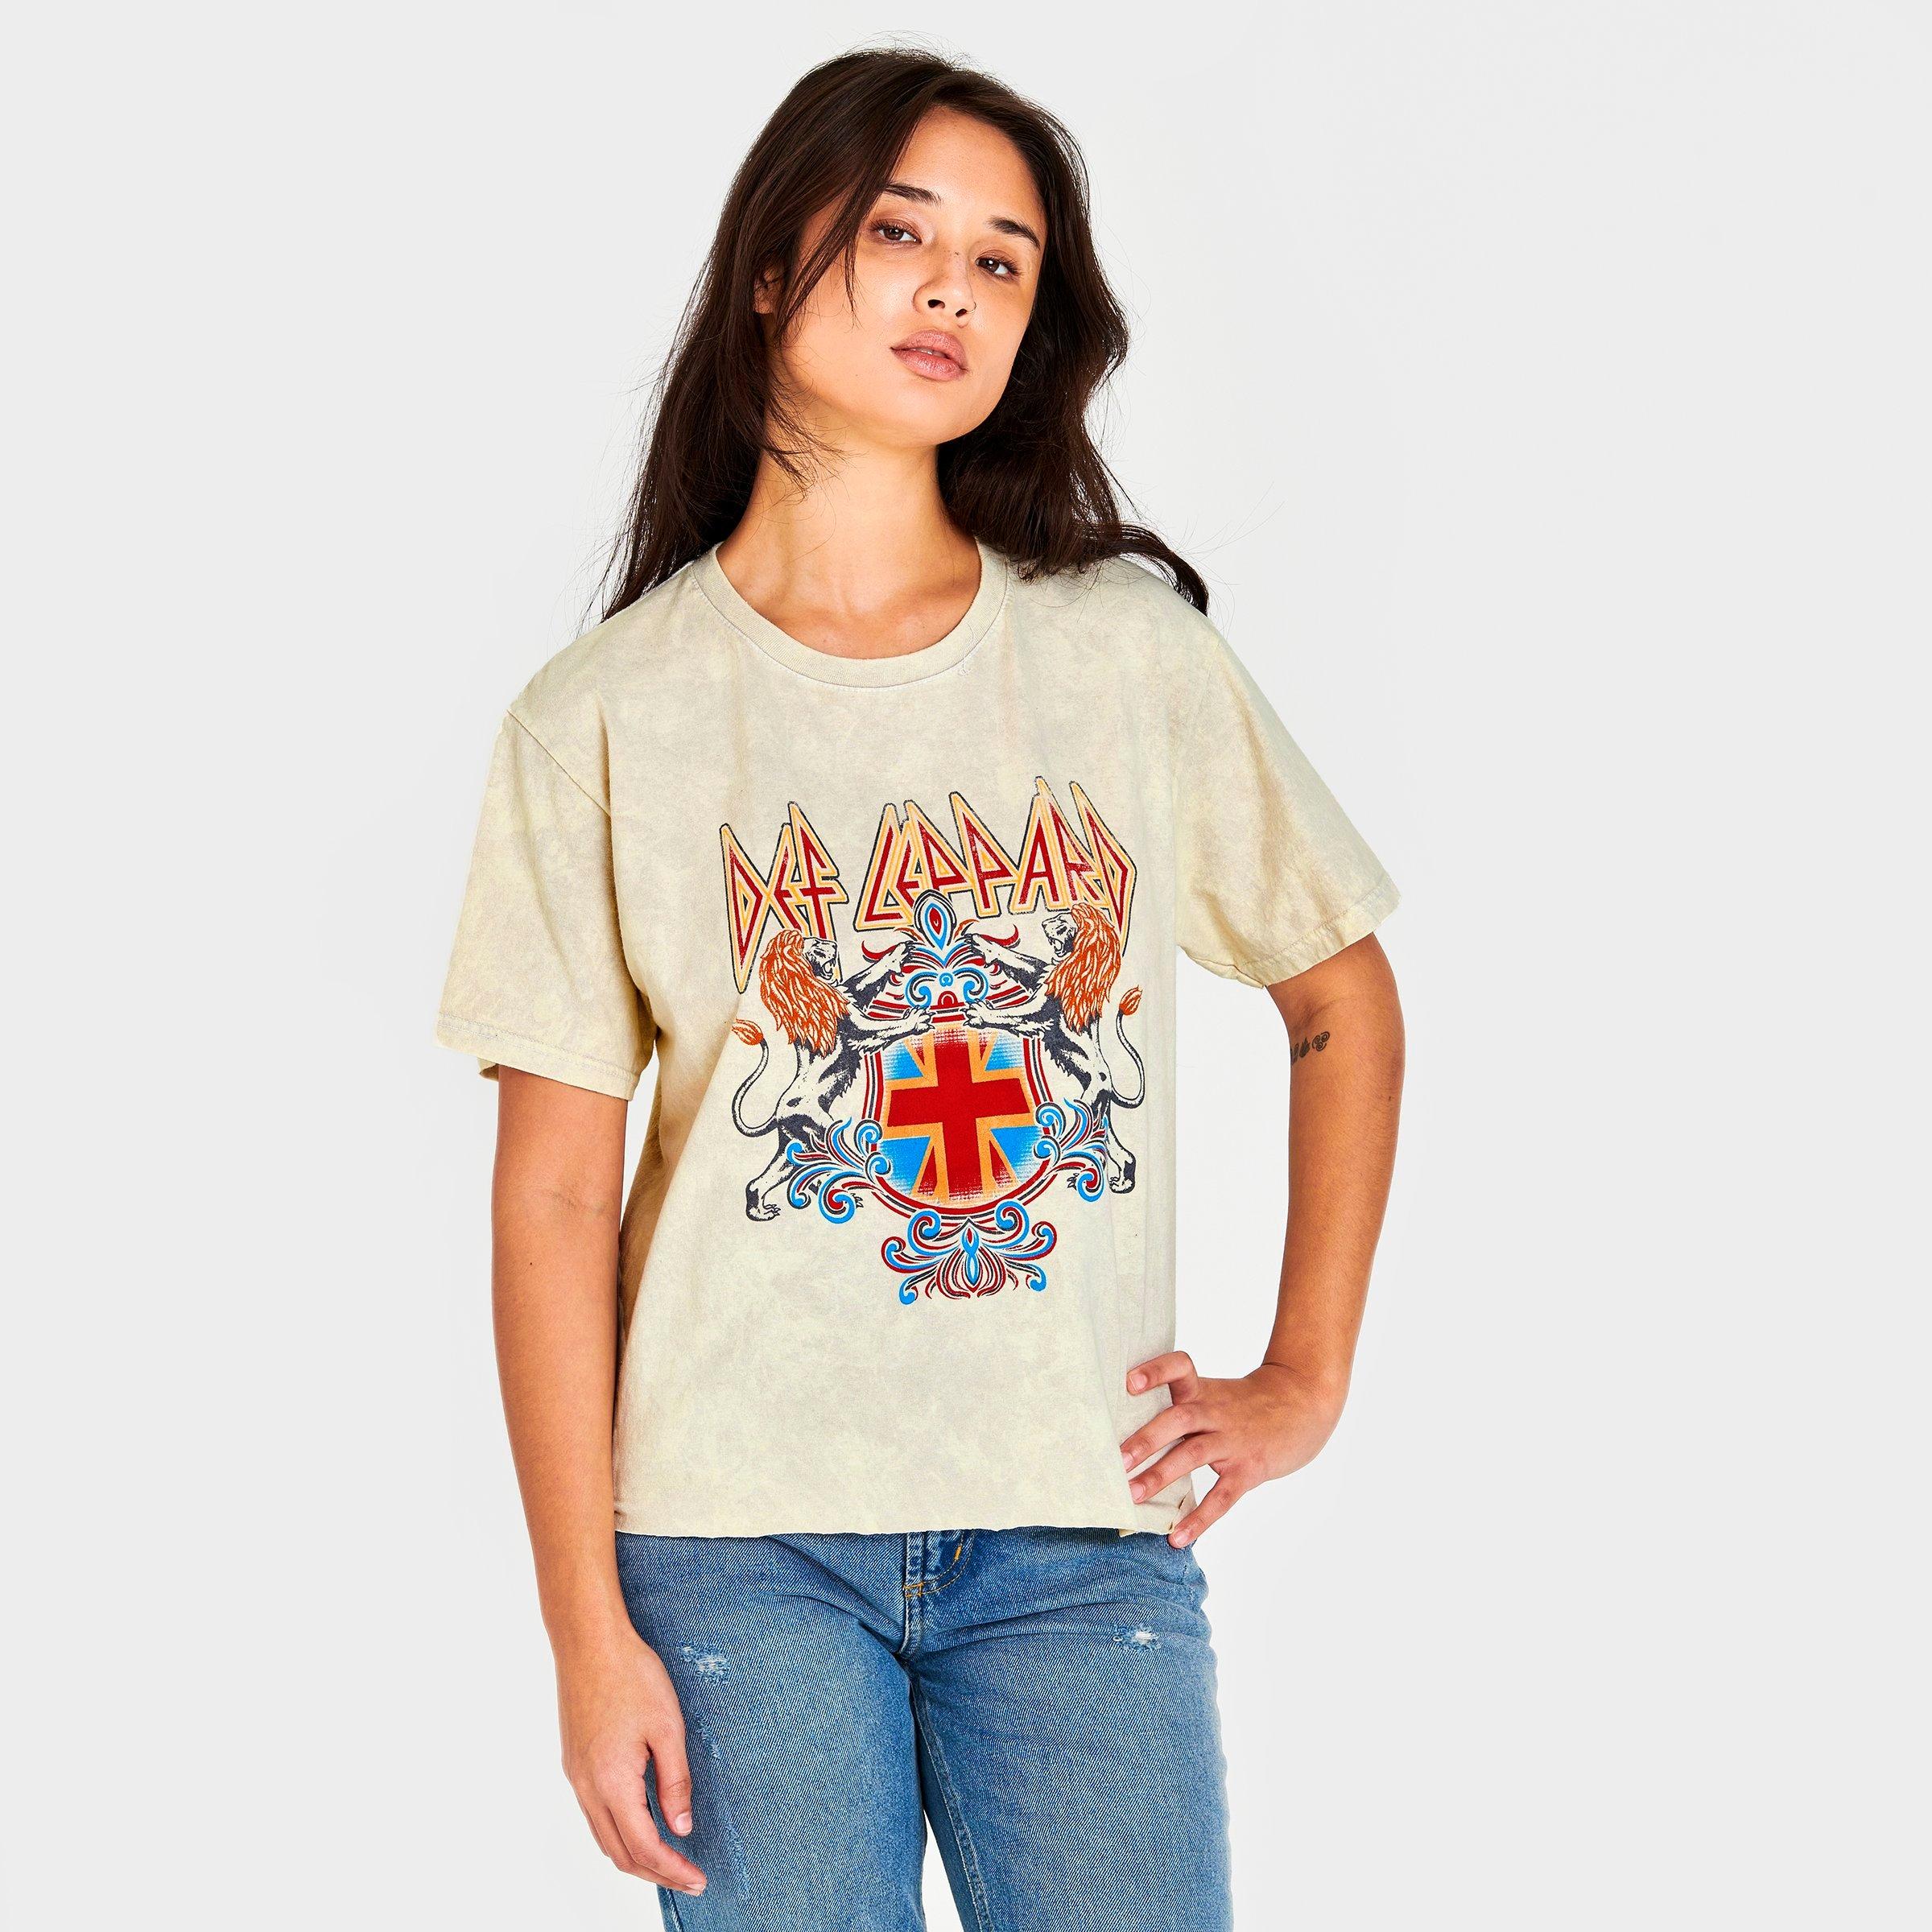 Graphic Tees Women's Def Leppard Cross Cropped T-shirt In Tan/multi